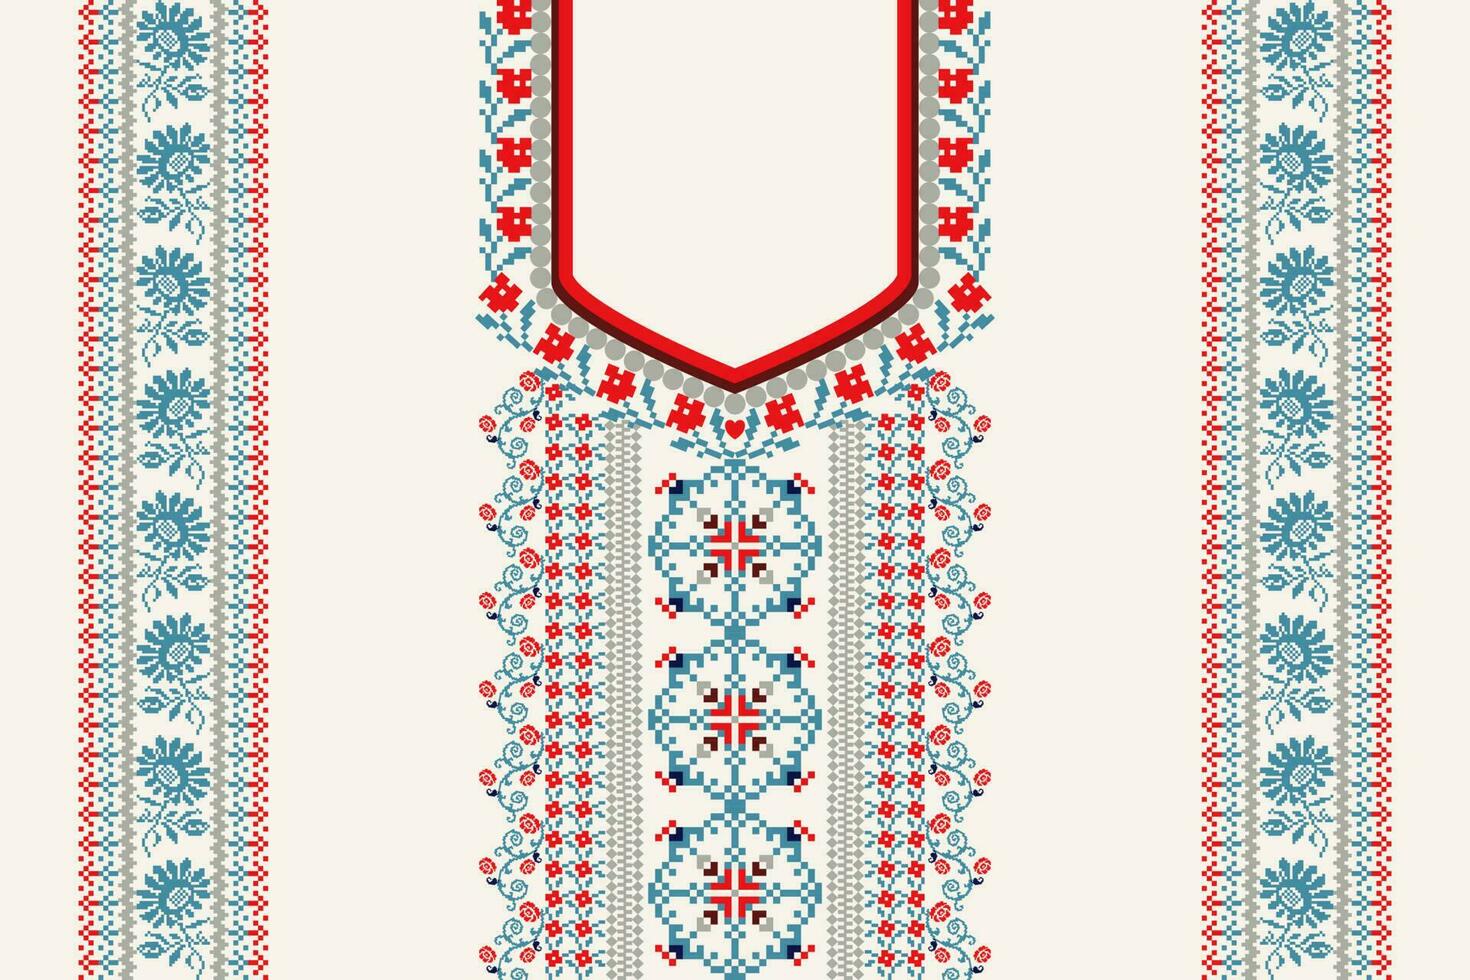 Neckline floral cross stitch embroidery on white background.boho neckline orientalist pattern traditional.Aztec style abstract illustration.design for texture,fabric,fashion women wearing,clothing. vector